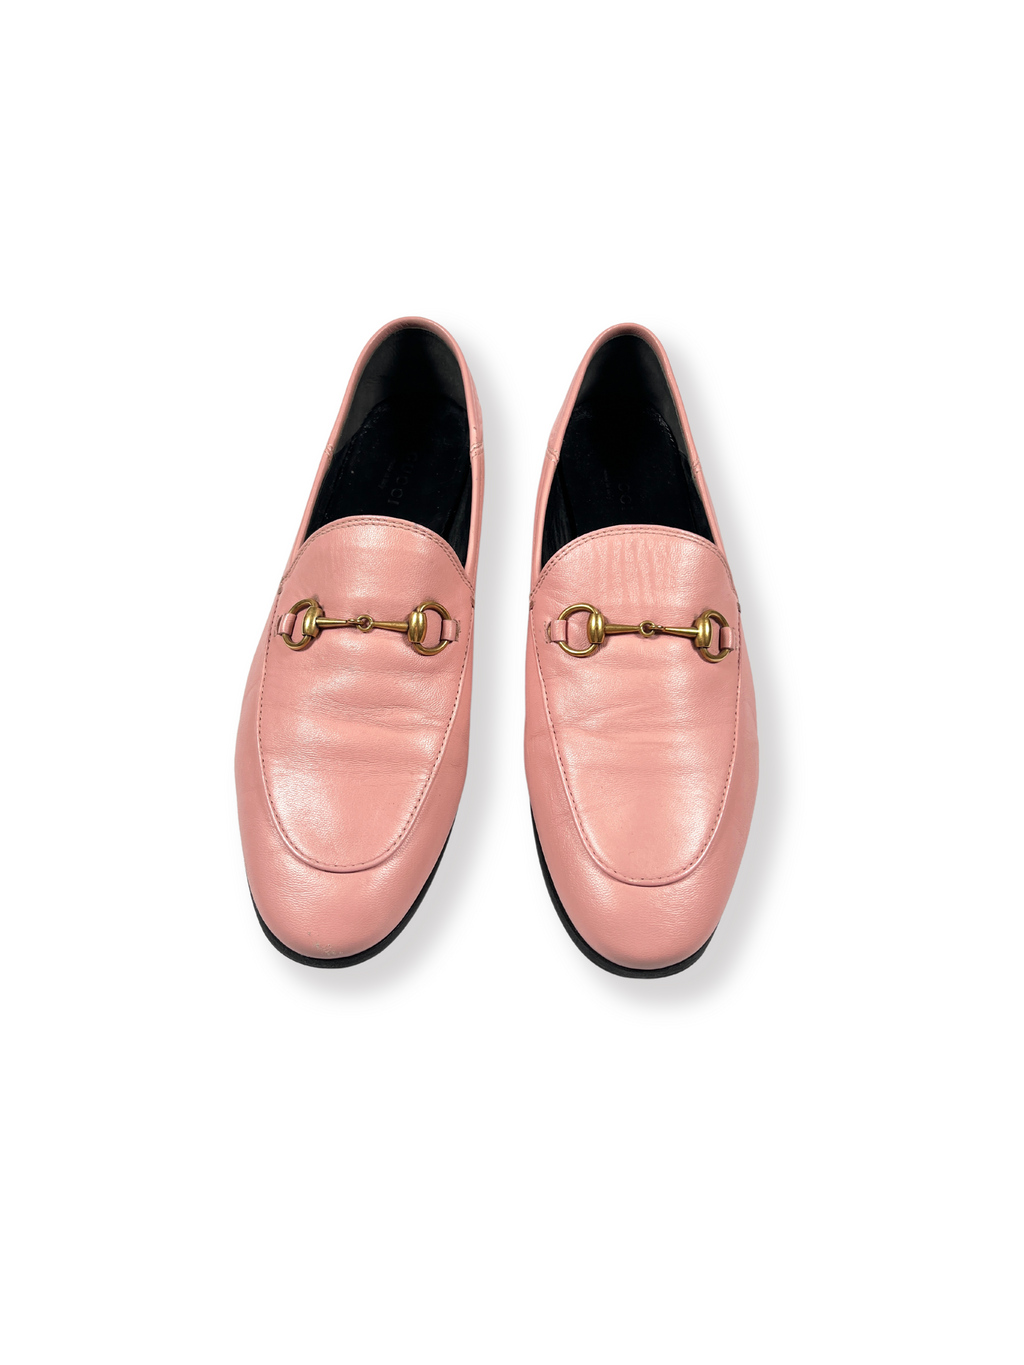 GUCCI - BRIXTON LOAFER IN PINK LEATHER - SZ 38.5